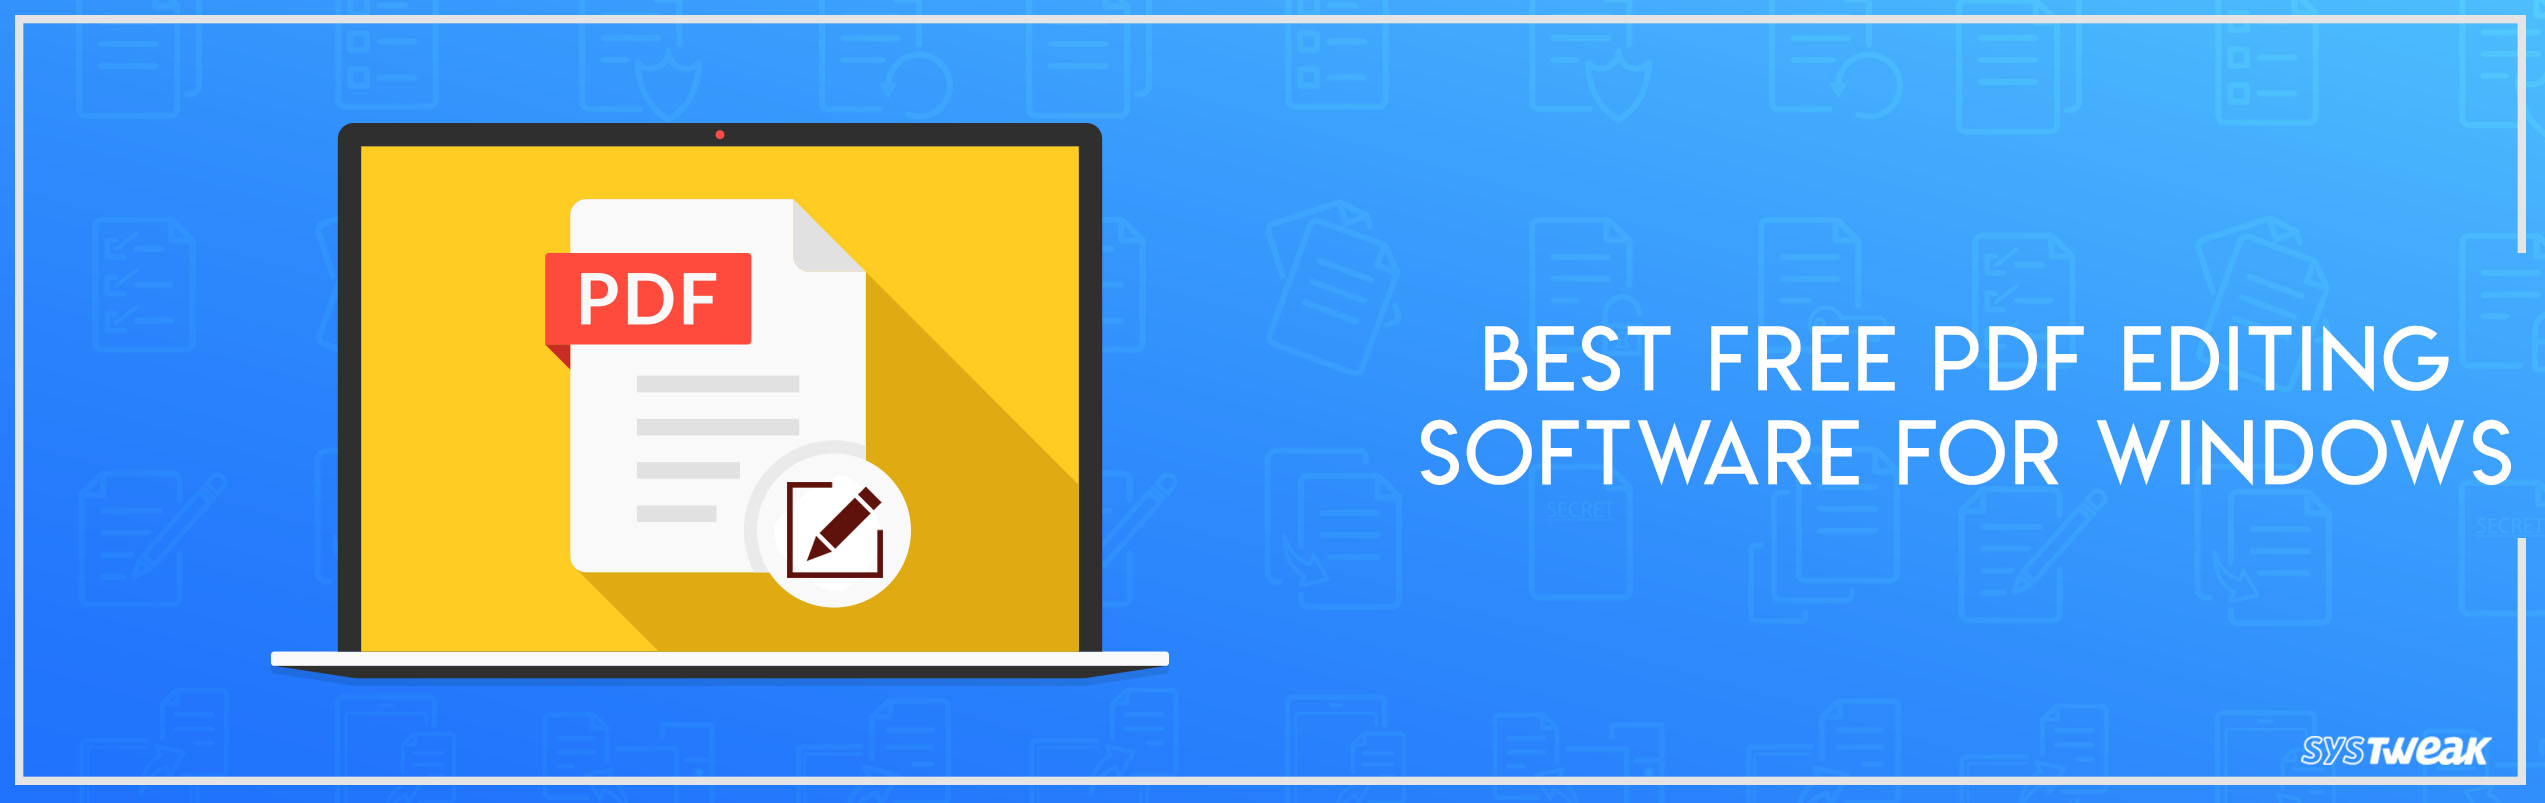 best free pdf software for windows